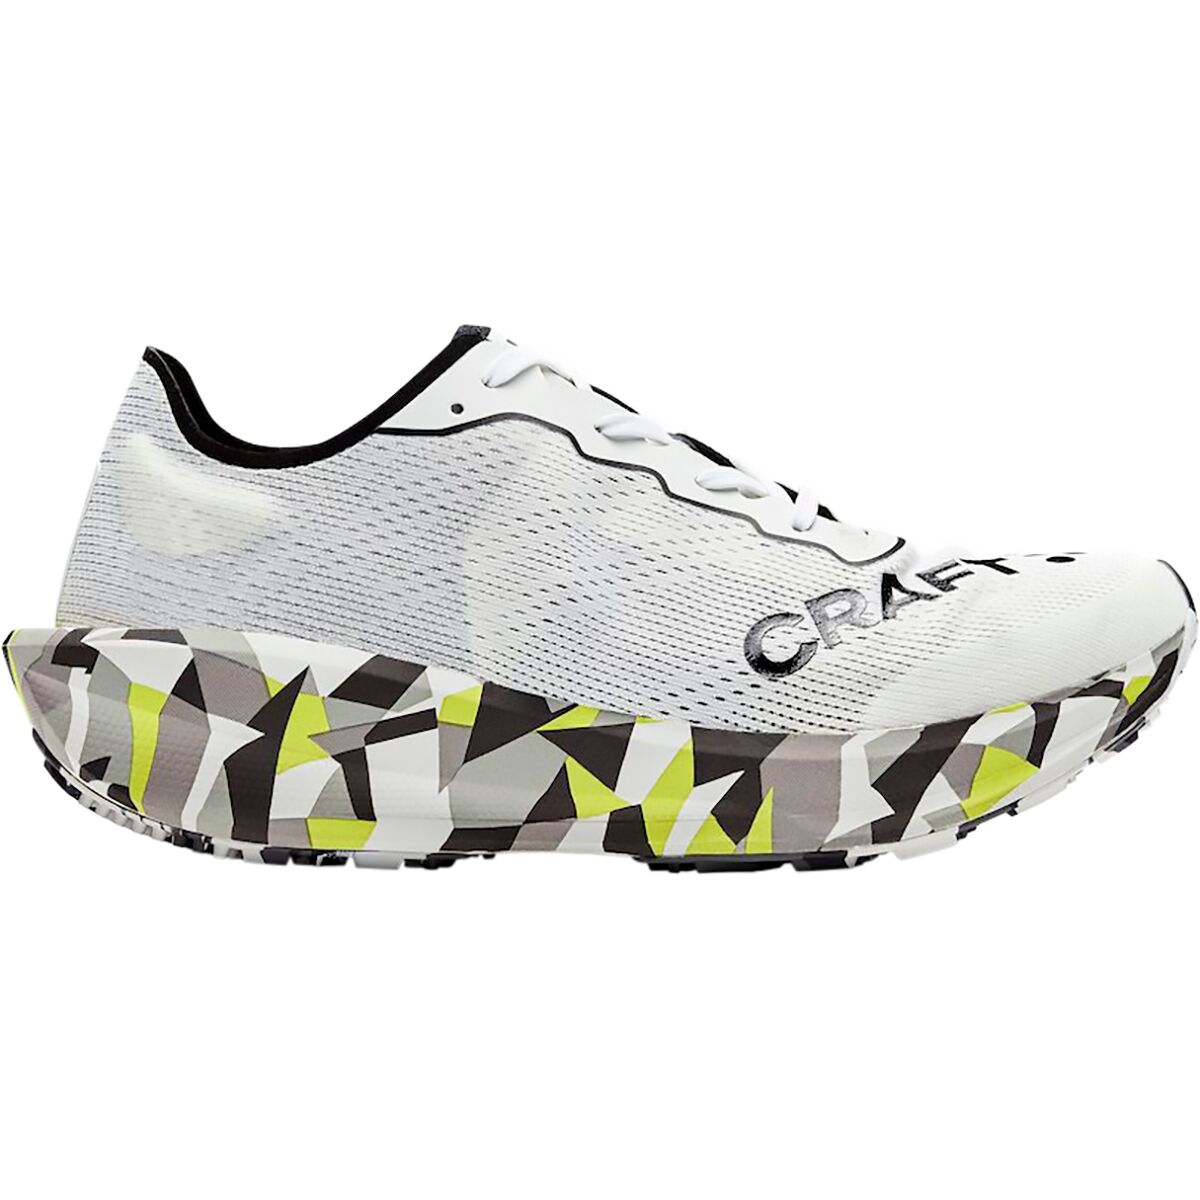 CTM Ultra Carbon 2 Running Shoe - Men's by Craft | US-Parks.com